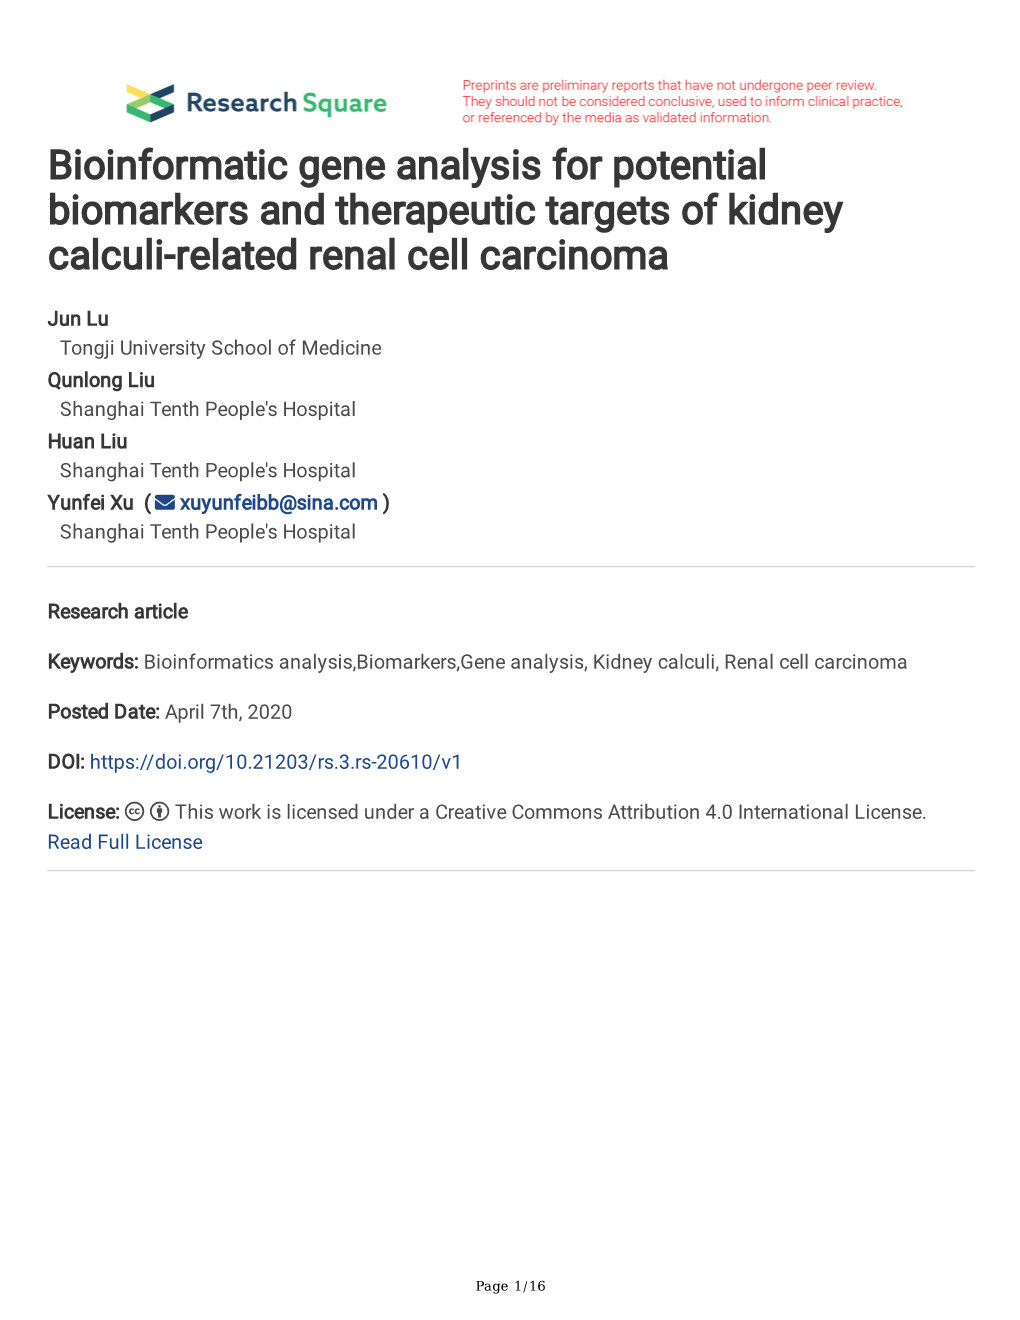 Bioinformatic Gene Analysis for Potential Biomarkers and Therapeutic Targets of Kidney Calculi-Related Renal Cell Carcinoma